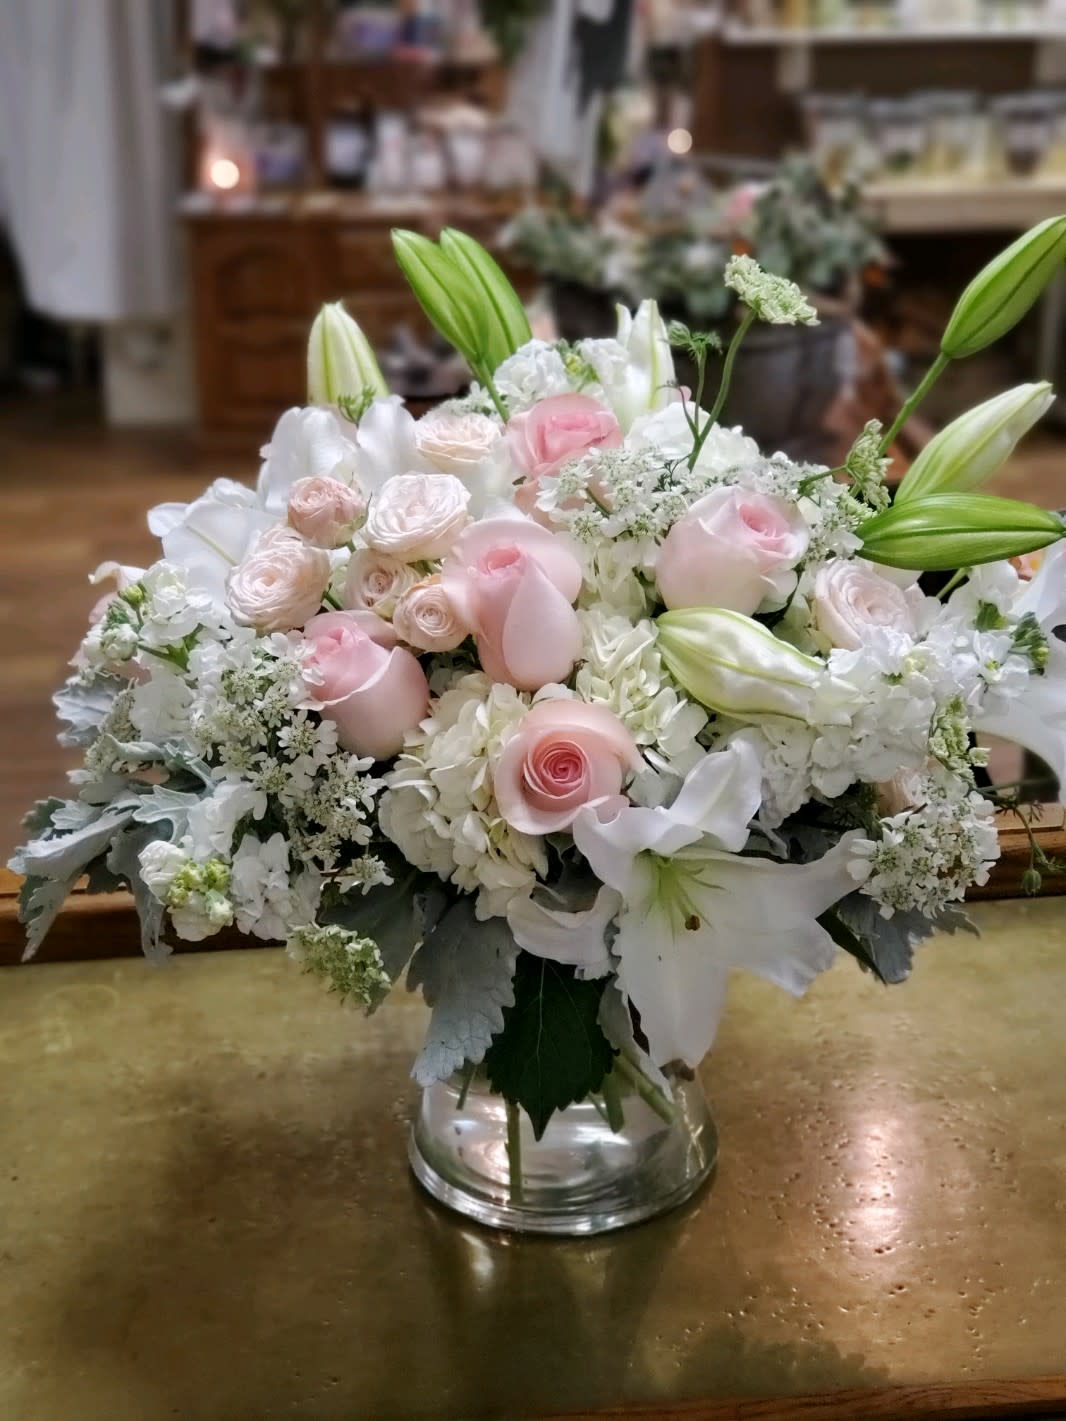 Gentle Pastels  - Pink and white blooms for a soft look that include: hydrangea, lilies, roses, spray roses, stock &amp; dusty miller in a compact clear glass vase 